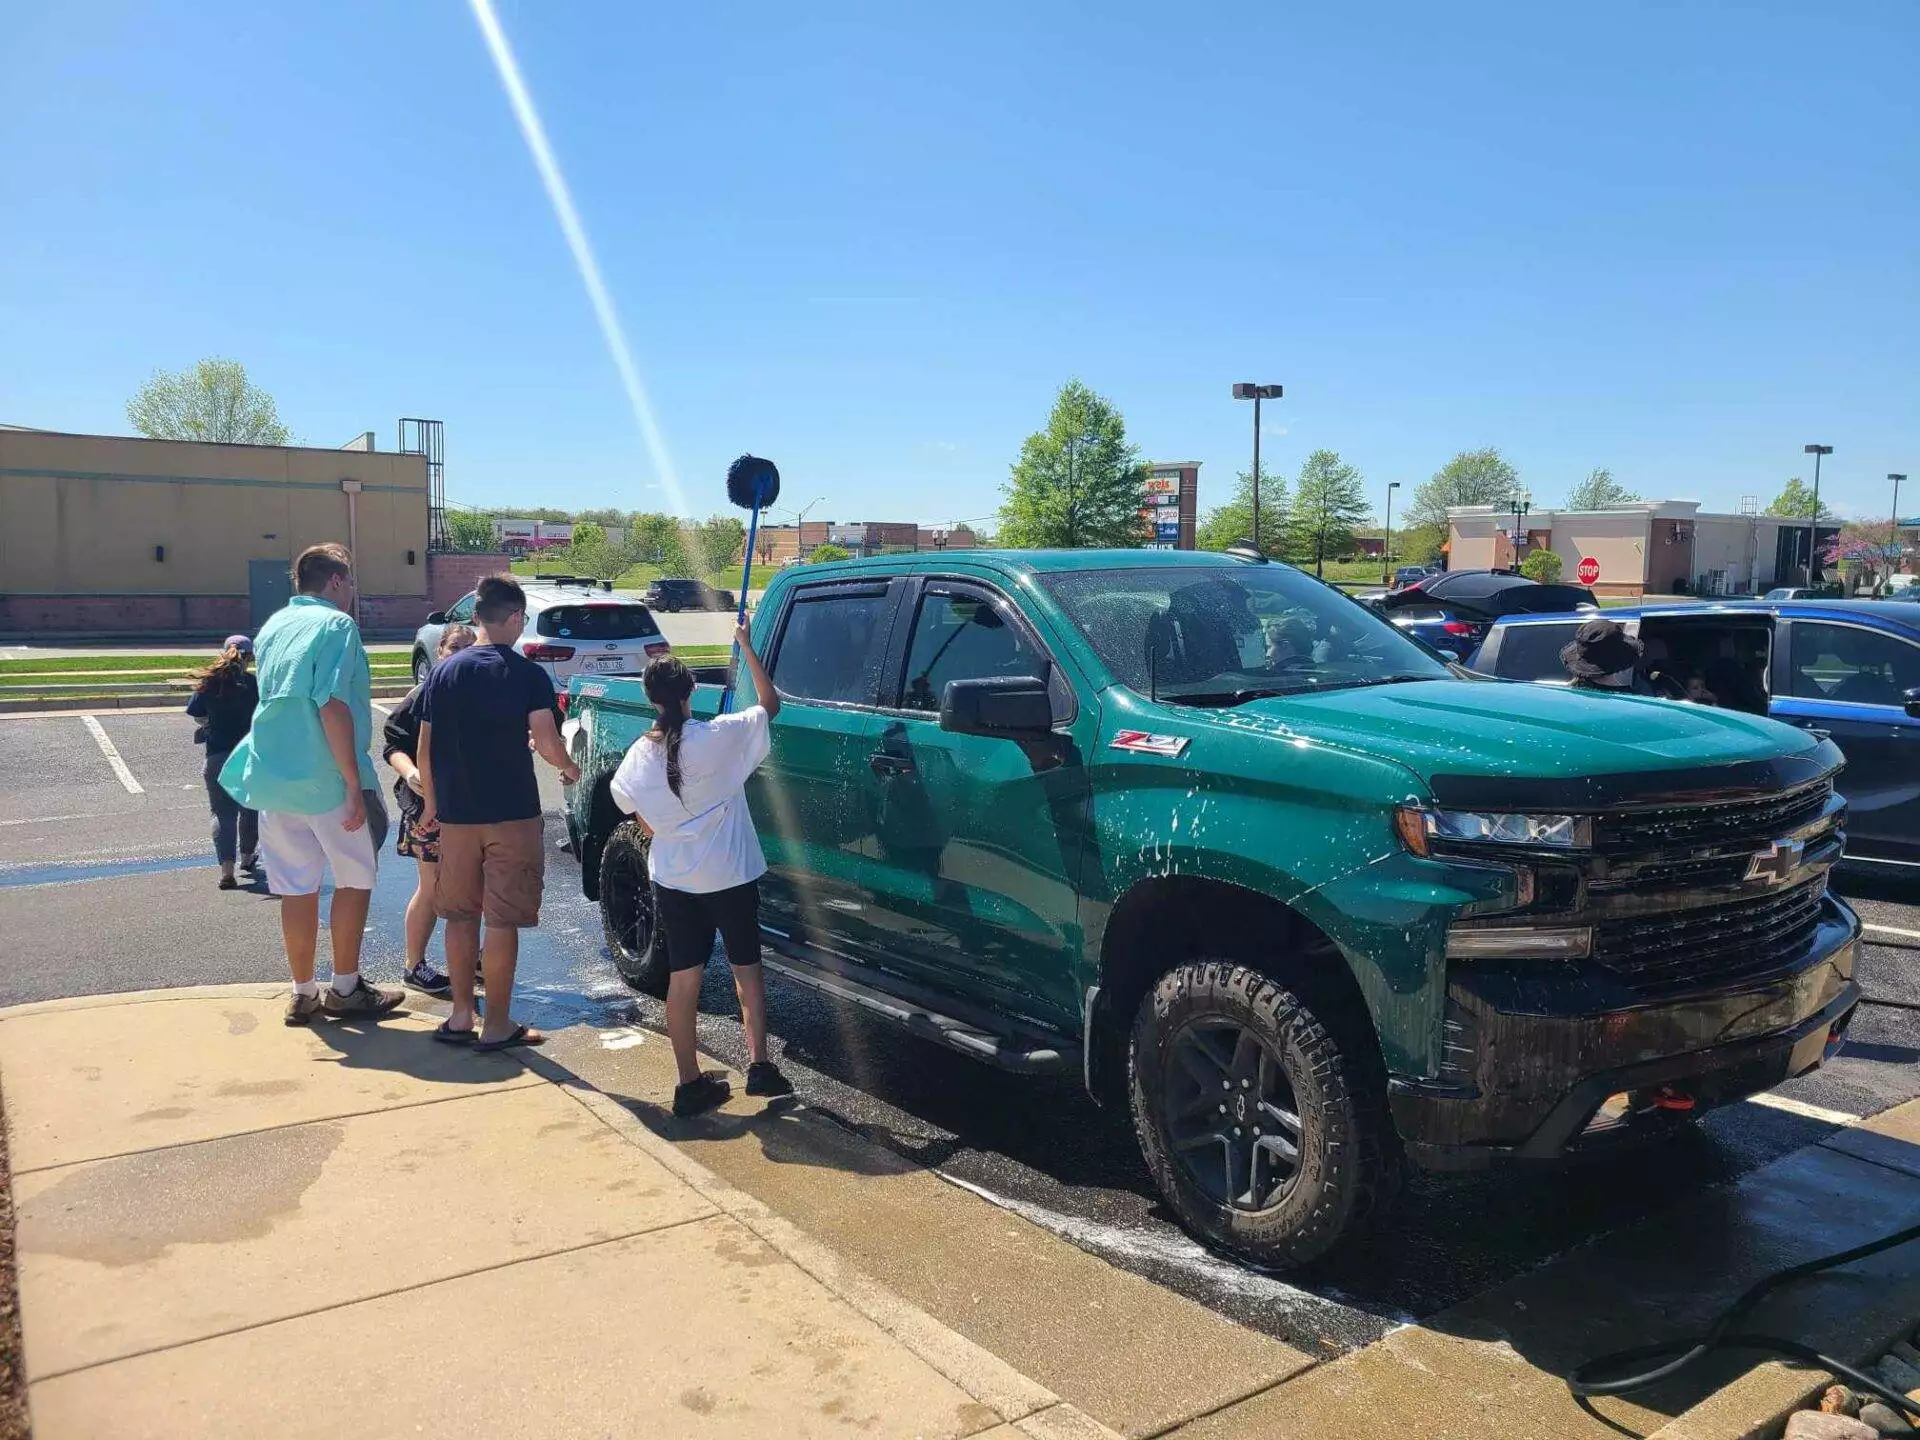 A group of people washing a green chevrolet truck at a community car wash event on a sunny day.